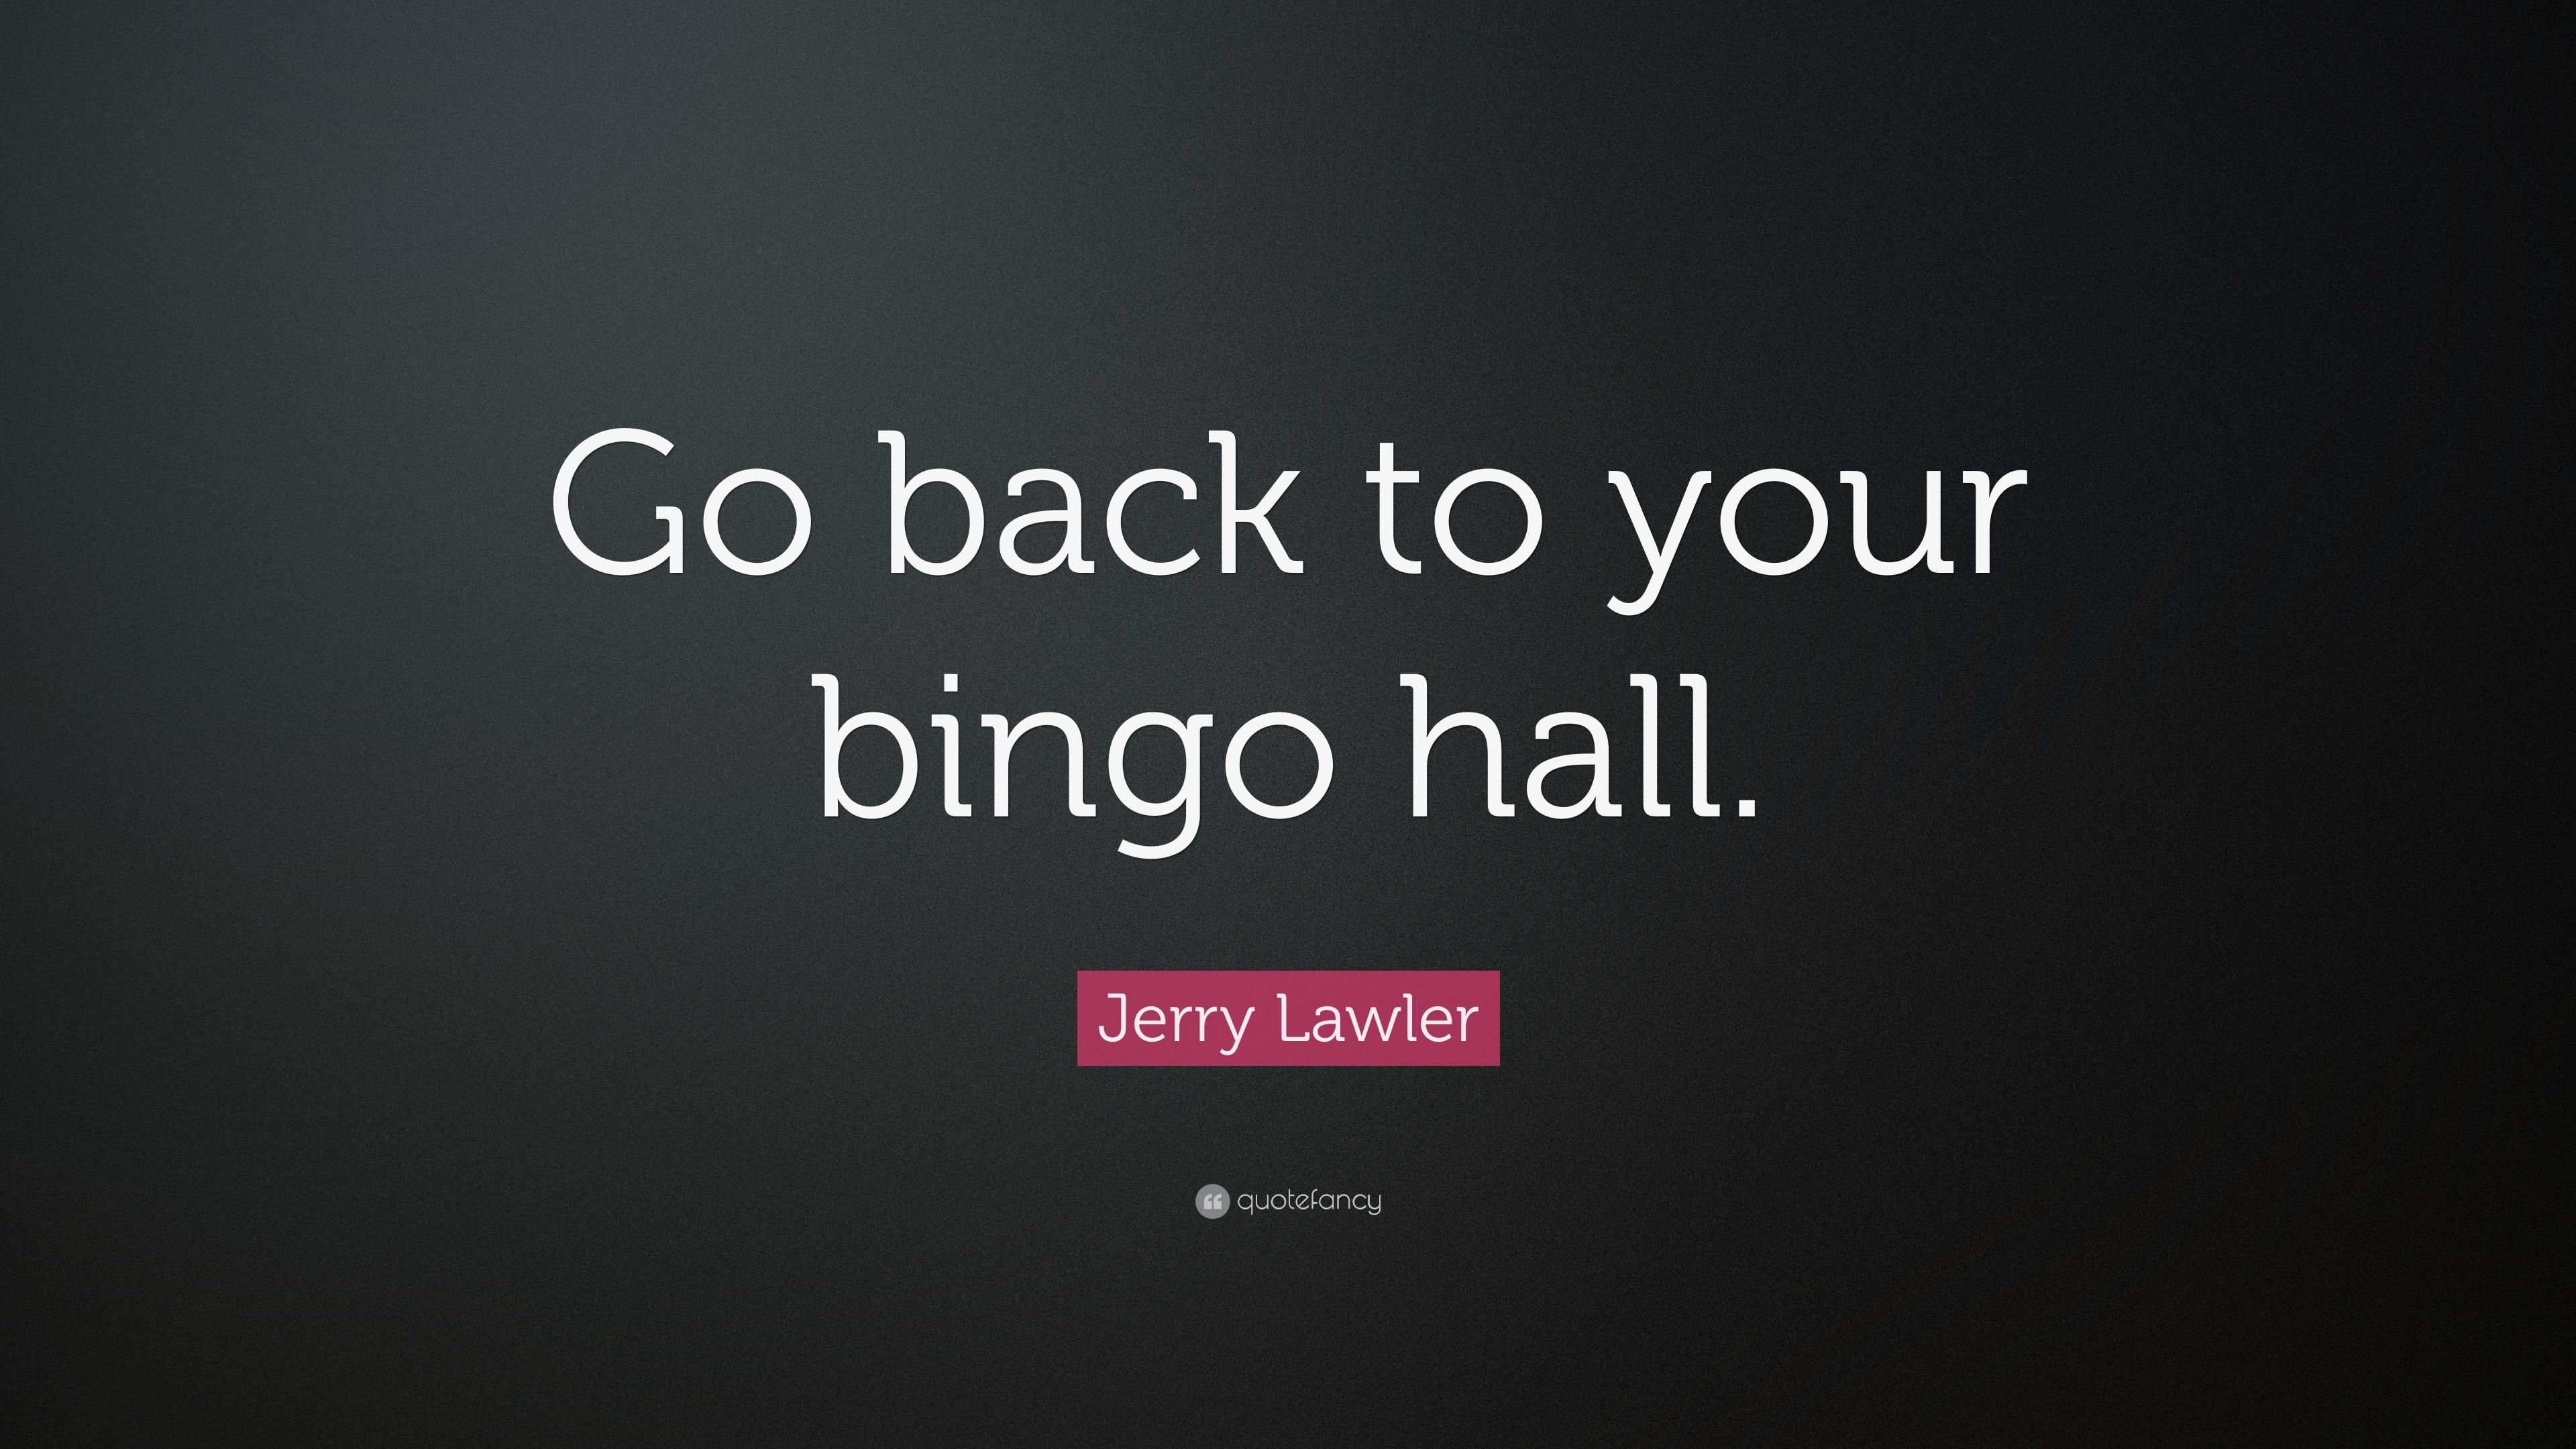 Jerry Lawler Quote: “Go back to your bingo hall.” 7 wallpaper